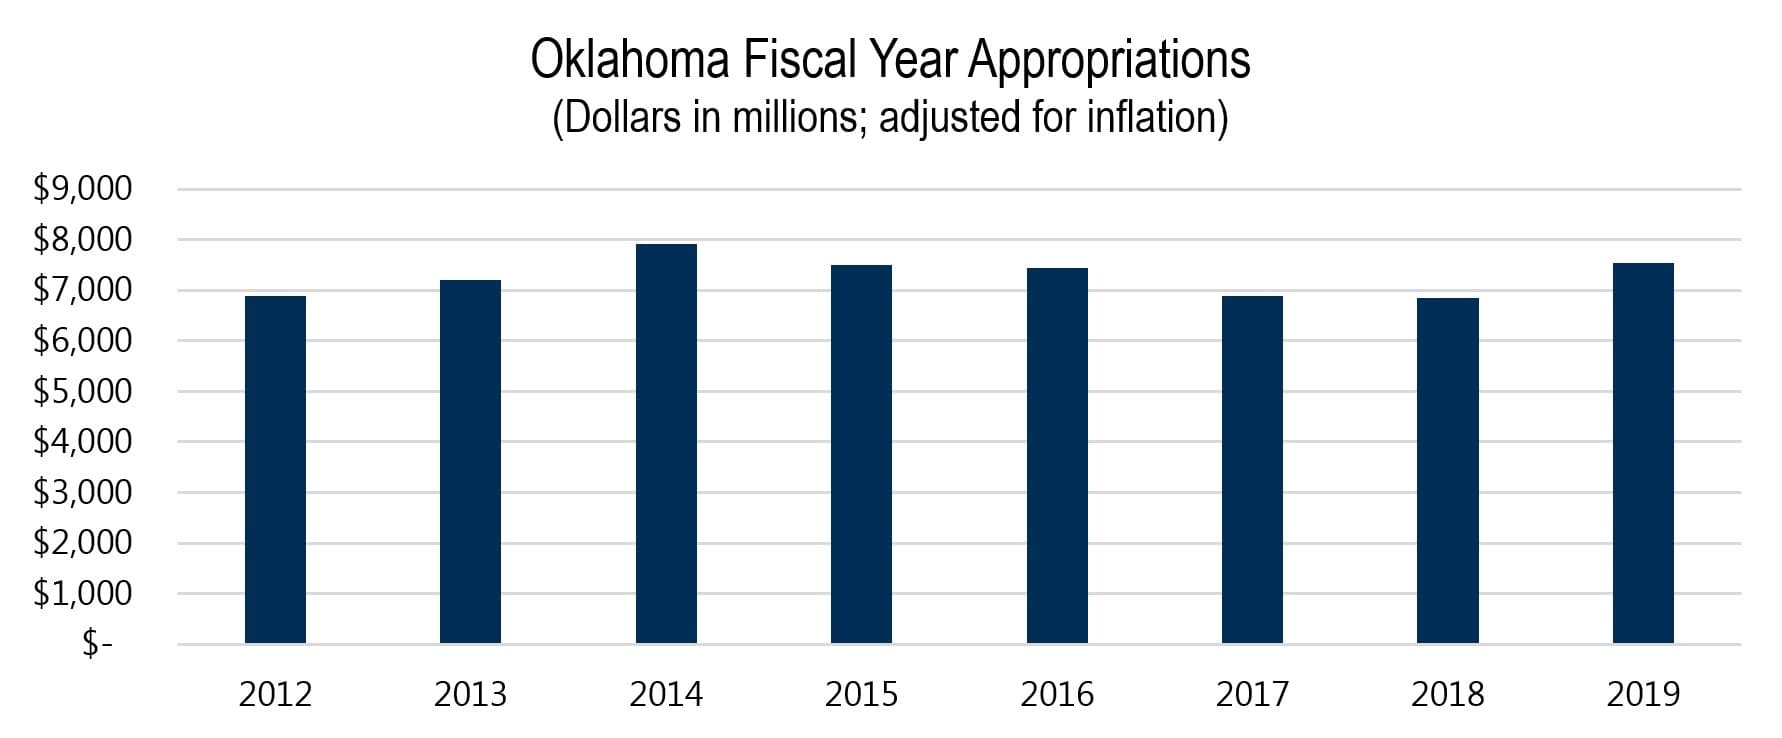 Oklahoma Fiscal Year Appropriations Adjusted for Inflation